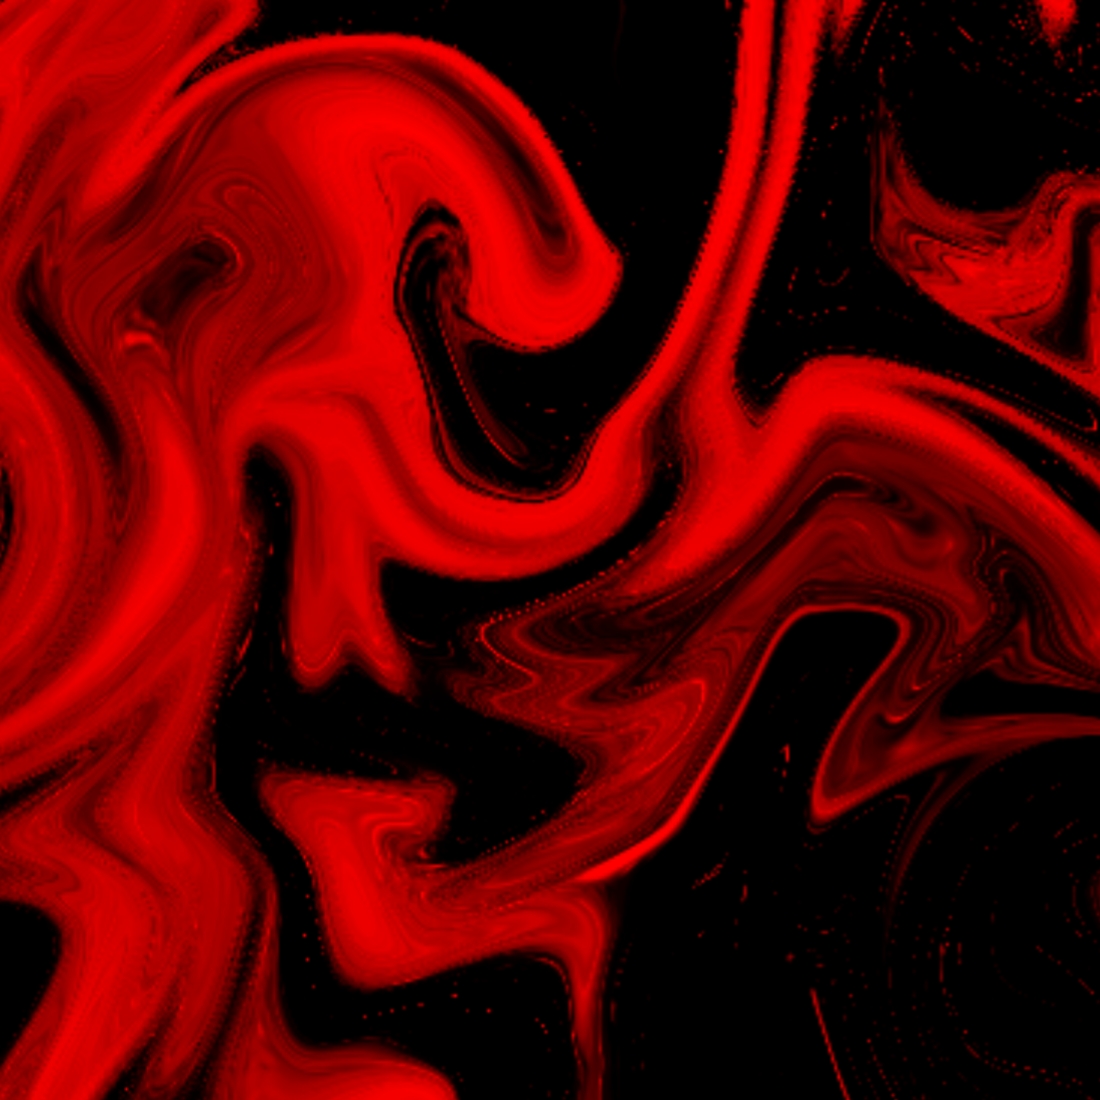 Abstract Red Texture Background Design cover image.